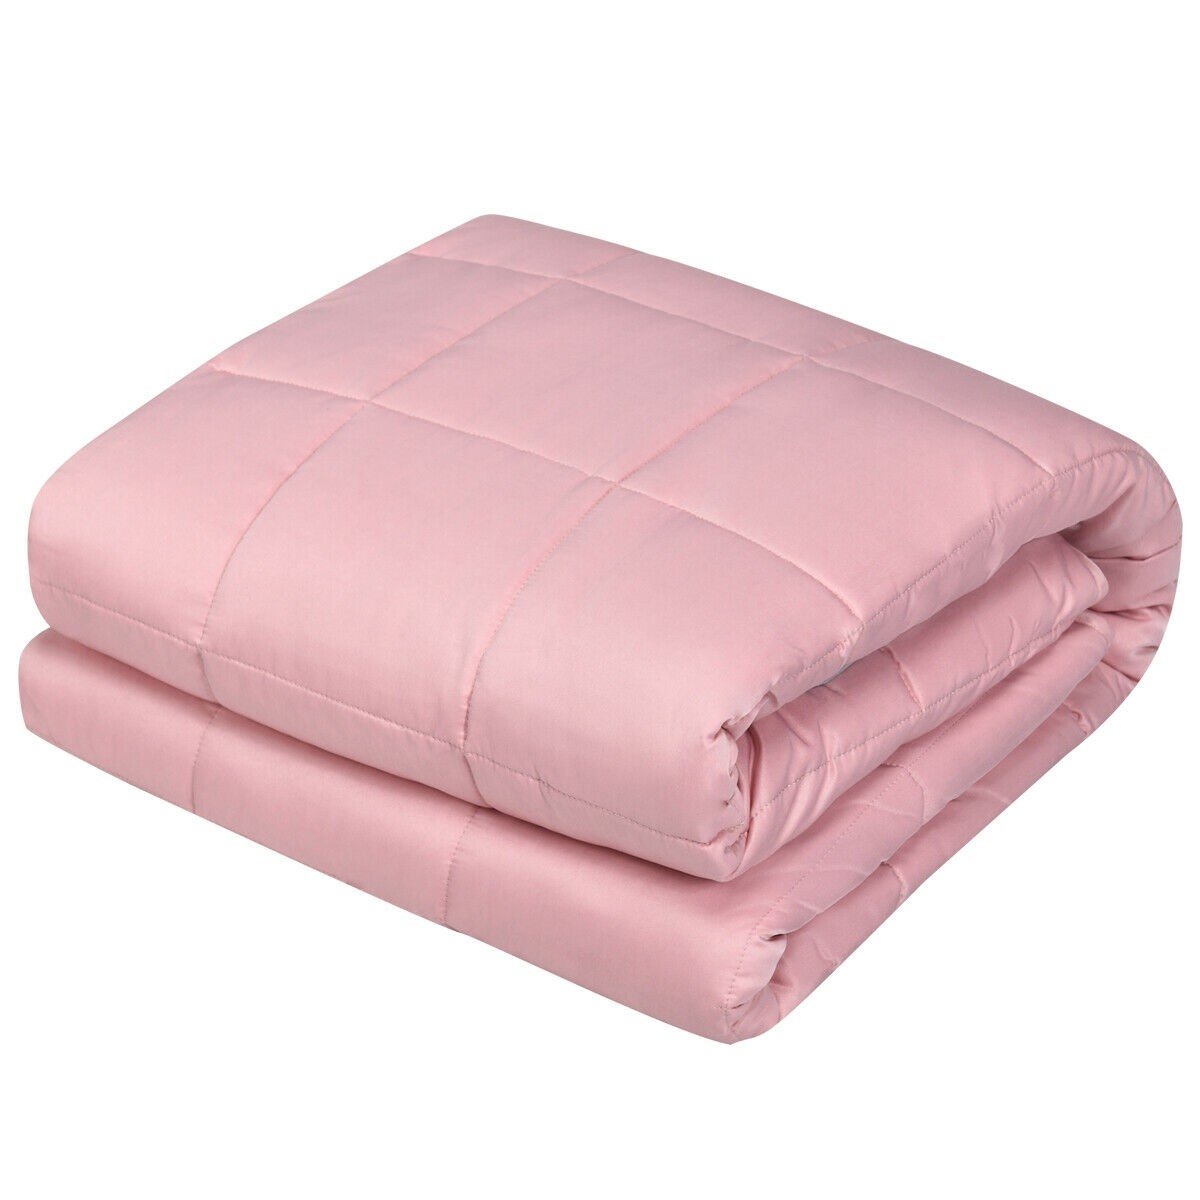 Cooling Weighted Blanket, Luxury Cooling Silk Sewed in Cotton, 41"x60" | 7lbs/10lbs